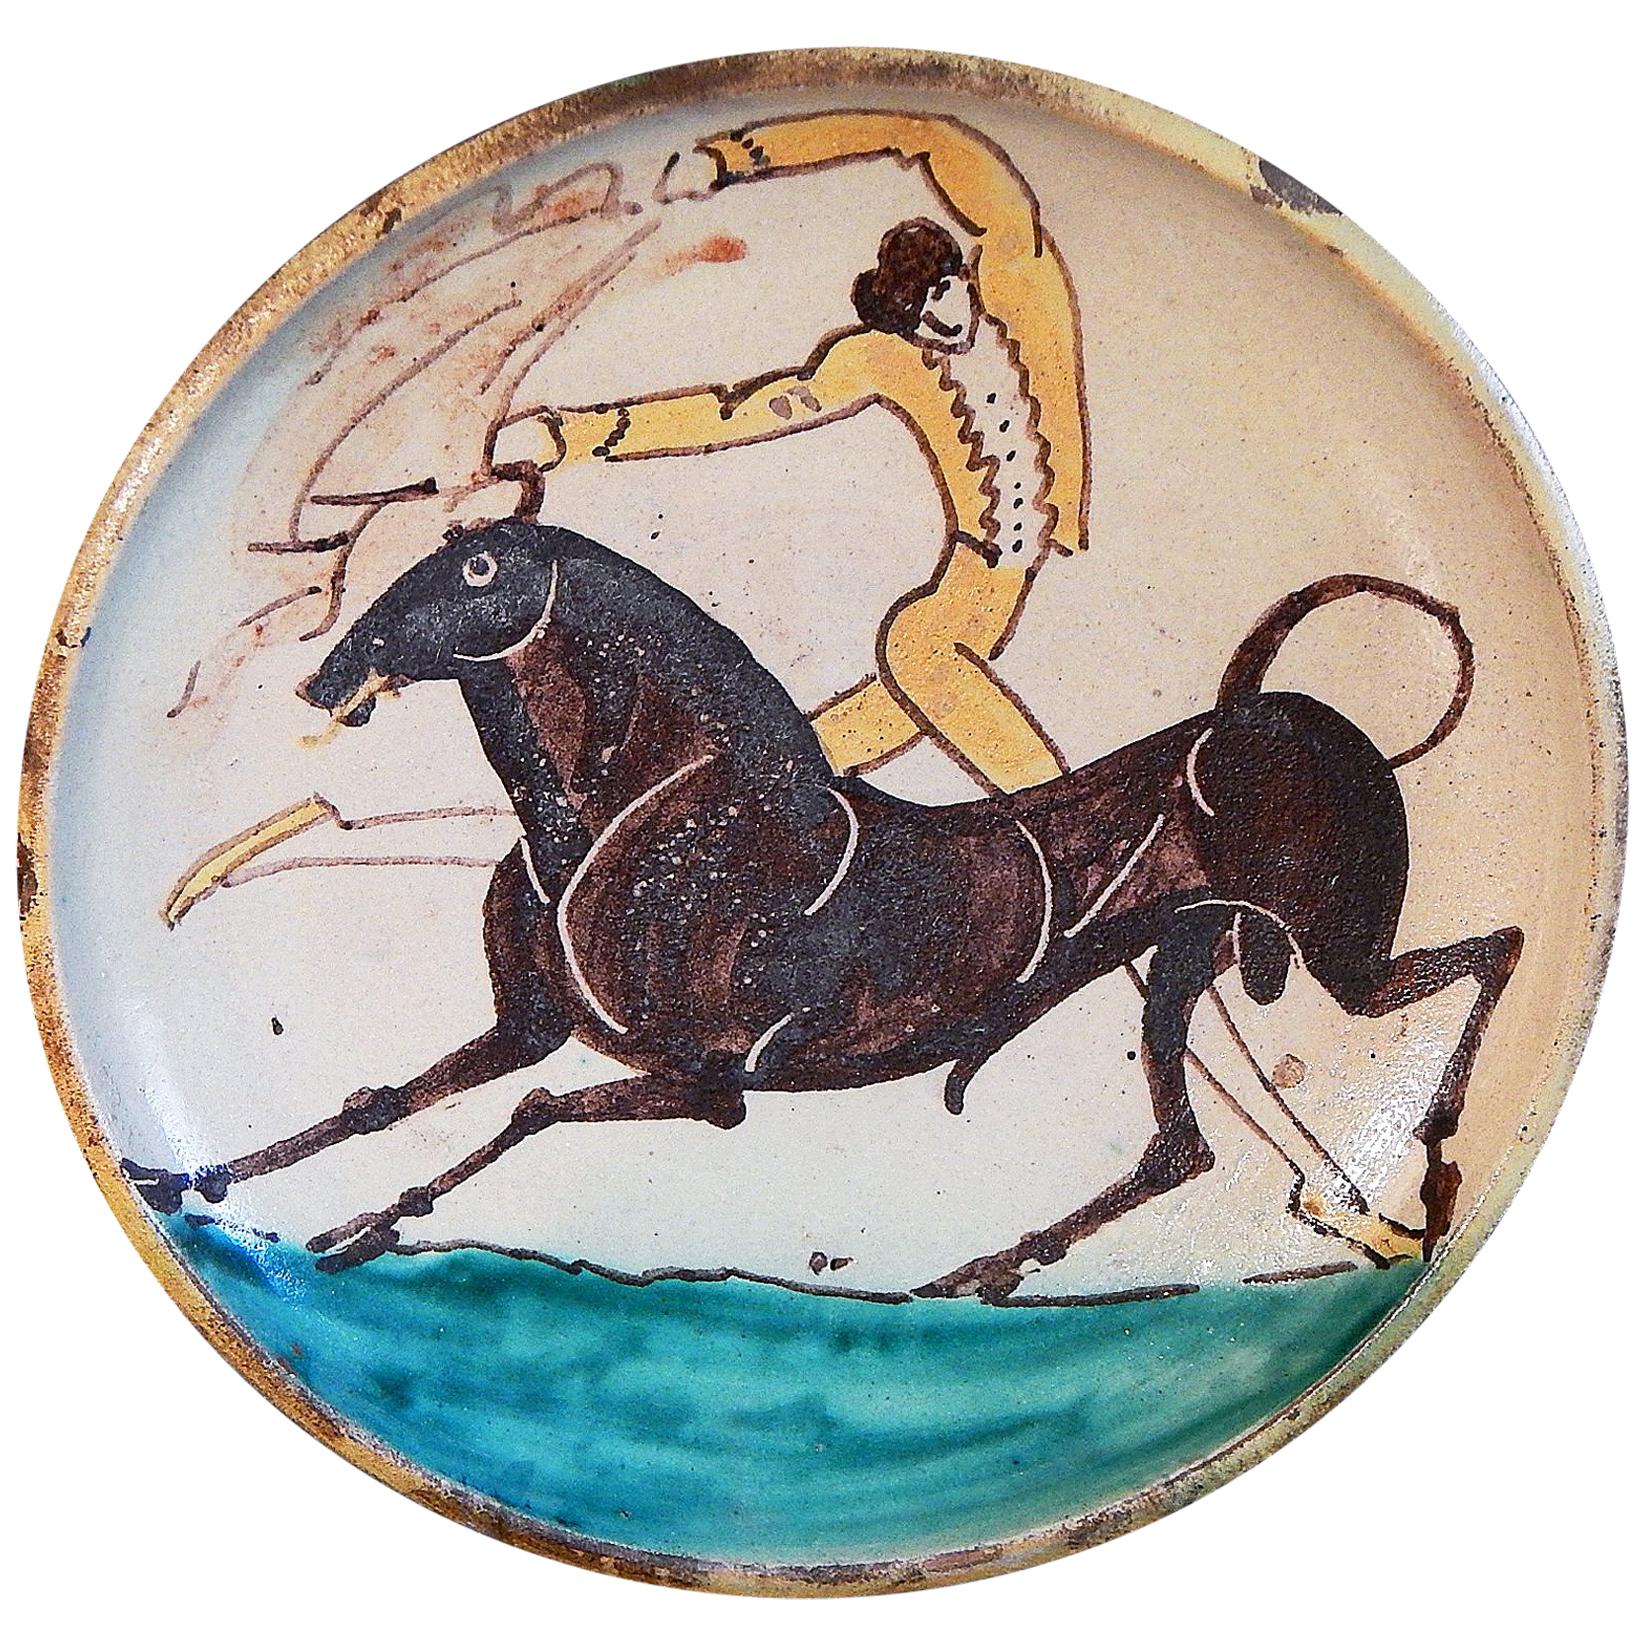 "Bullfighter and Bull, " Brilliant Art Deco Glazed Bowl by Diederich